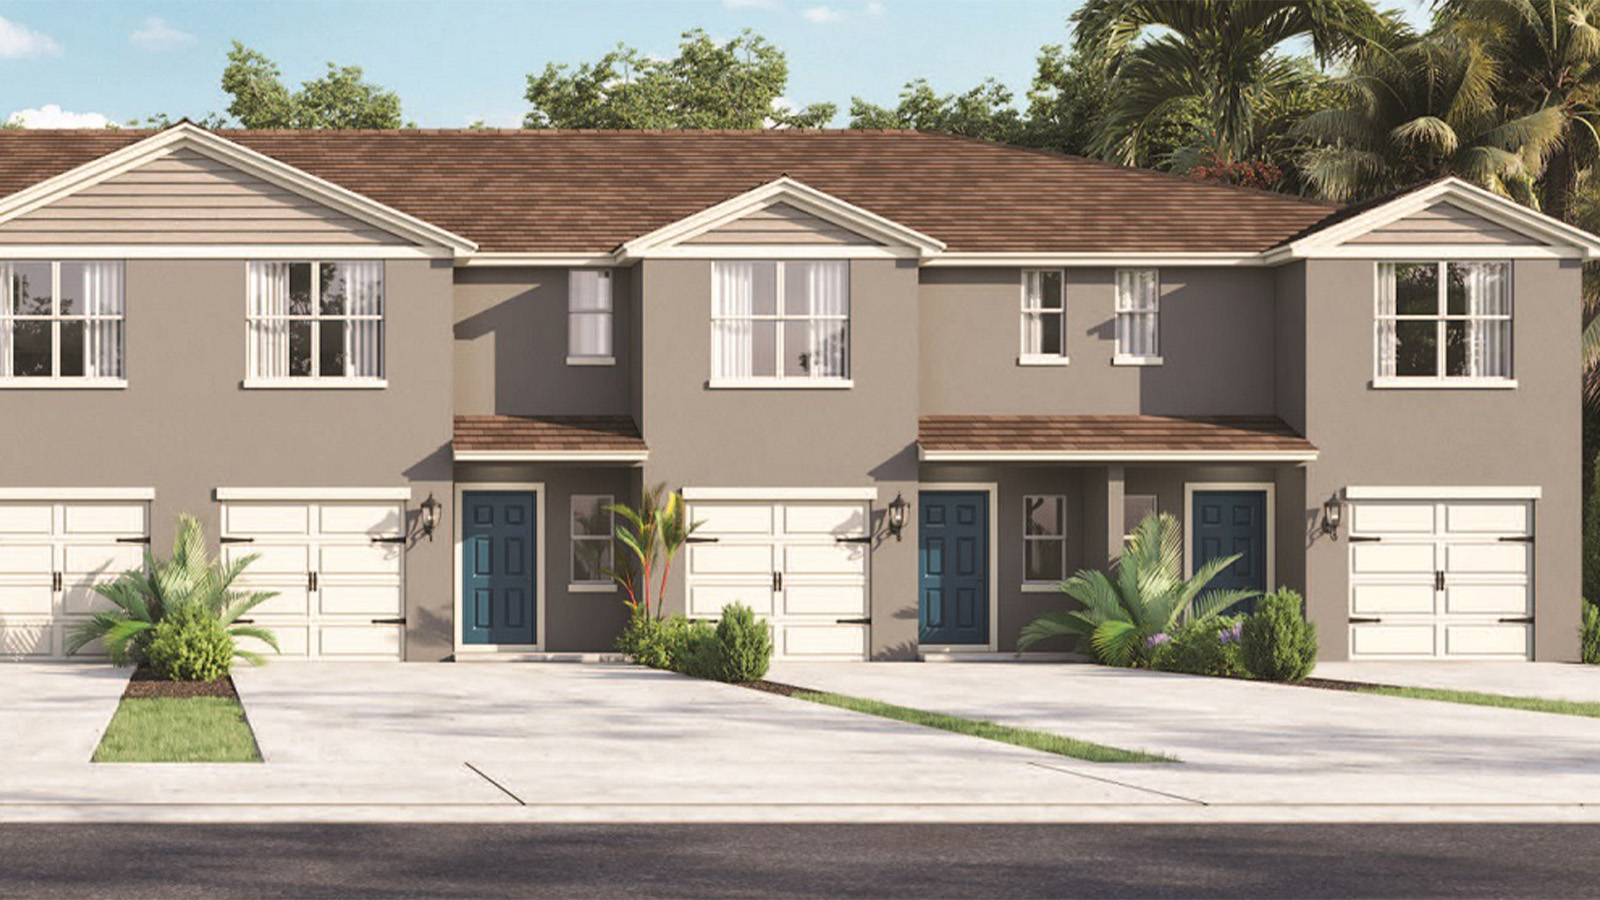 Two Story townhome rendering image